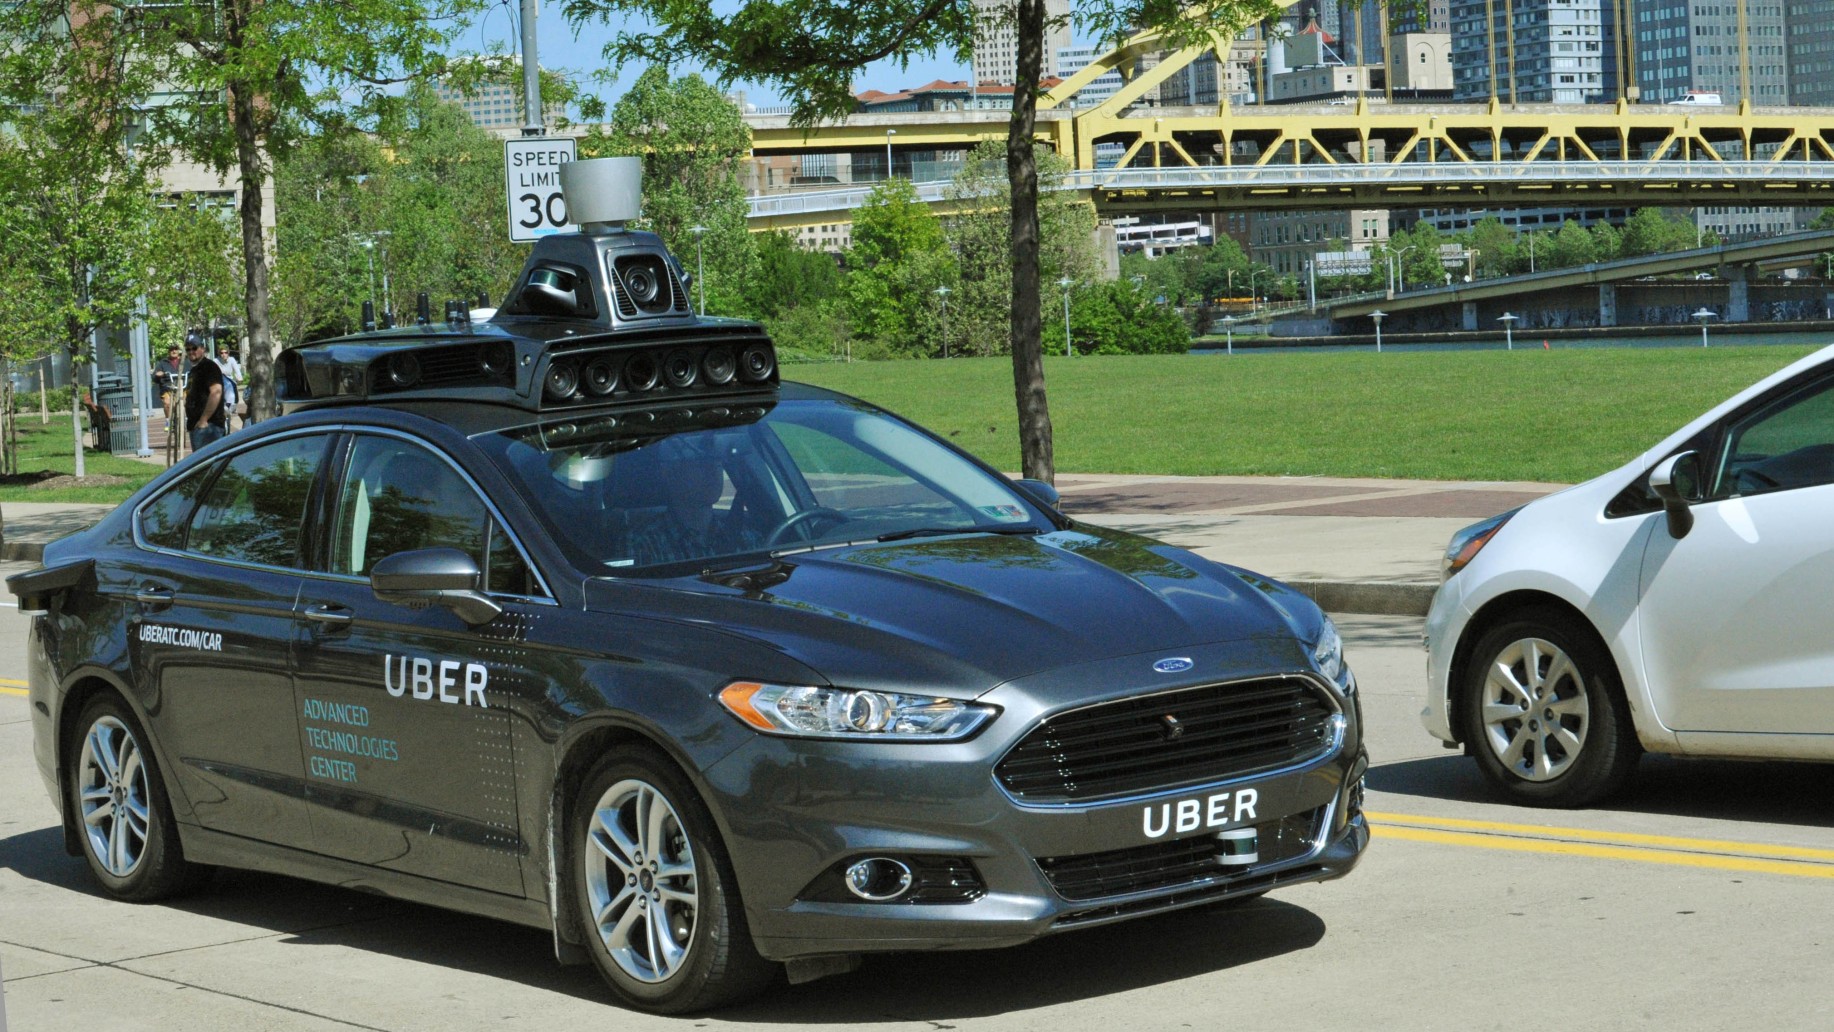 Here’s the First Glimpse of Uber’s Autonomous Car as It Undergoes Safety Testing